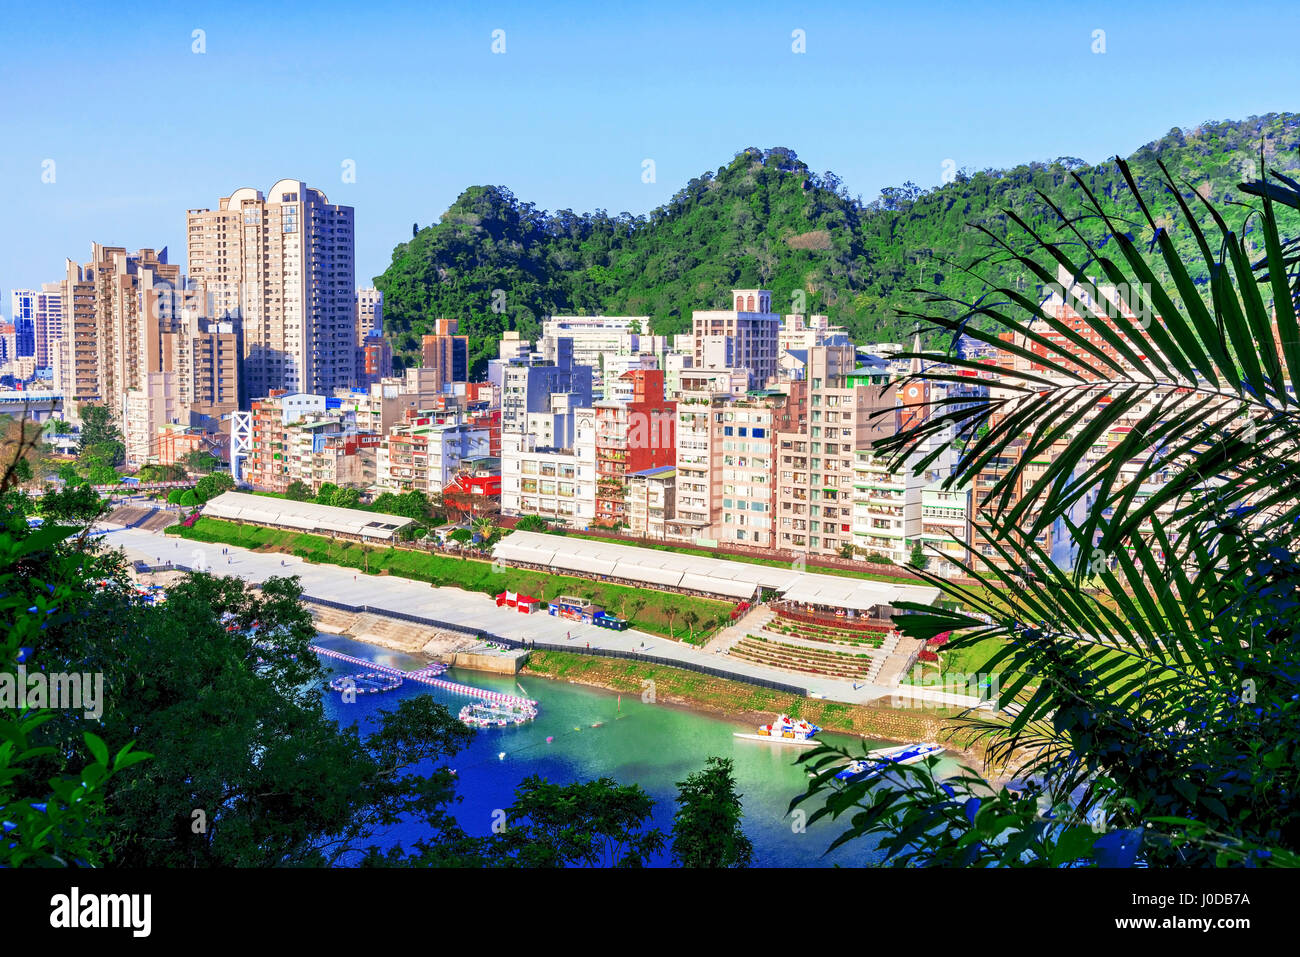 Scenic view of Taipei riverside buildings in Xindian Stock Photo